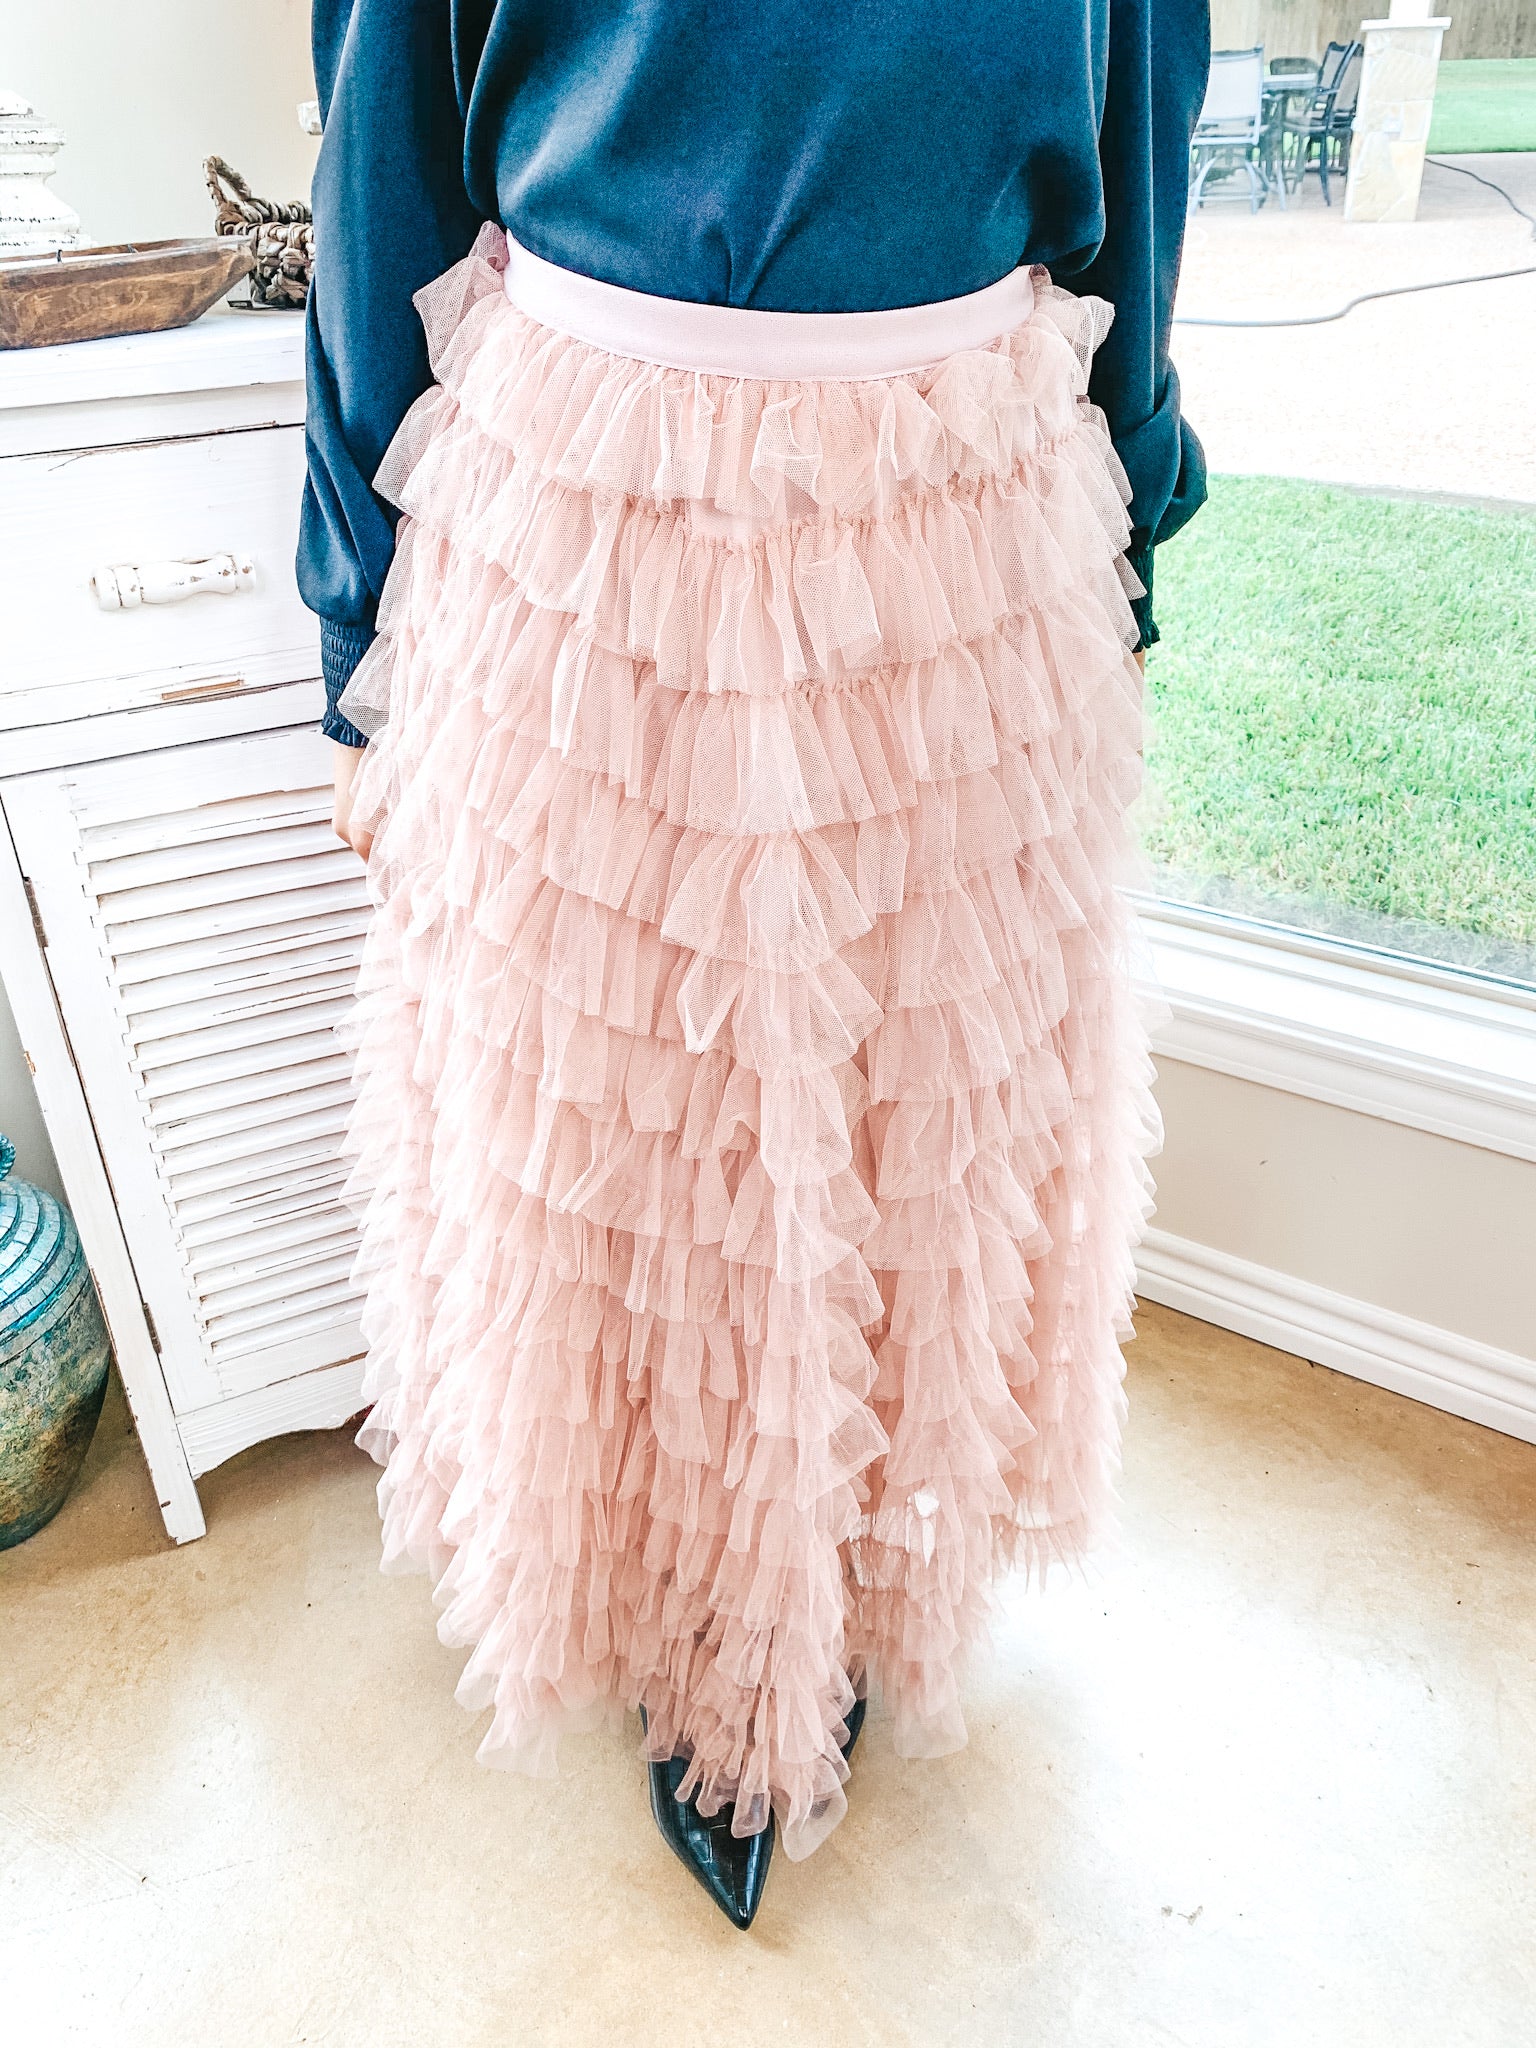 Warm Wishes Ruffle Tulle Maxi Skirt in Blush Pink